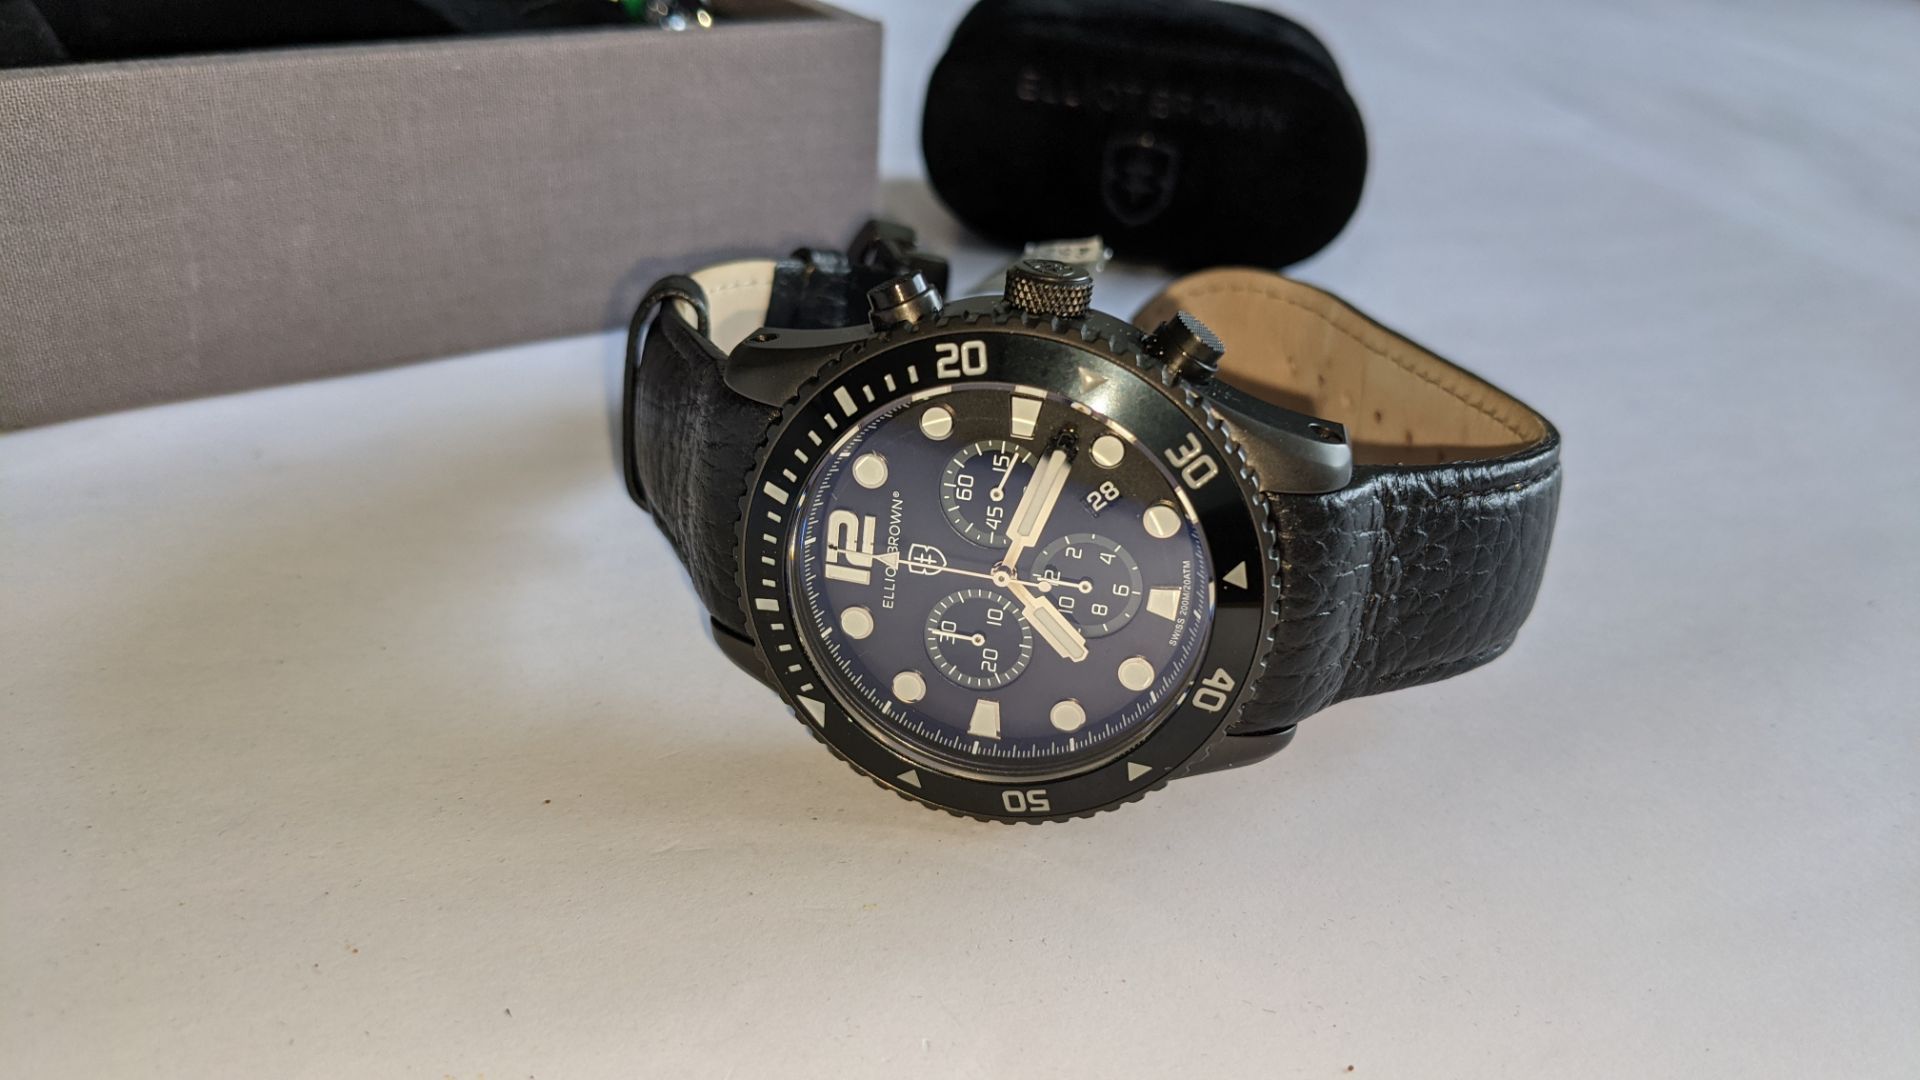 Elliot Brown The Bloxworth watch on leather strap, product code 929-001-L01. Stainless steel, 200M w - Image 8 of 15